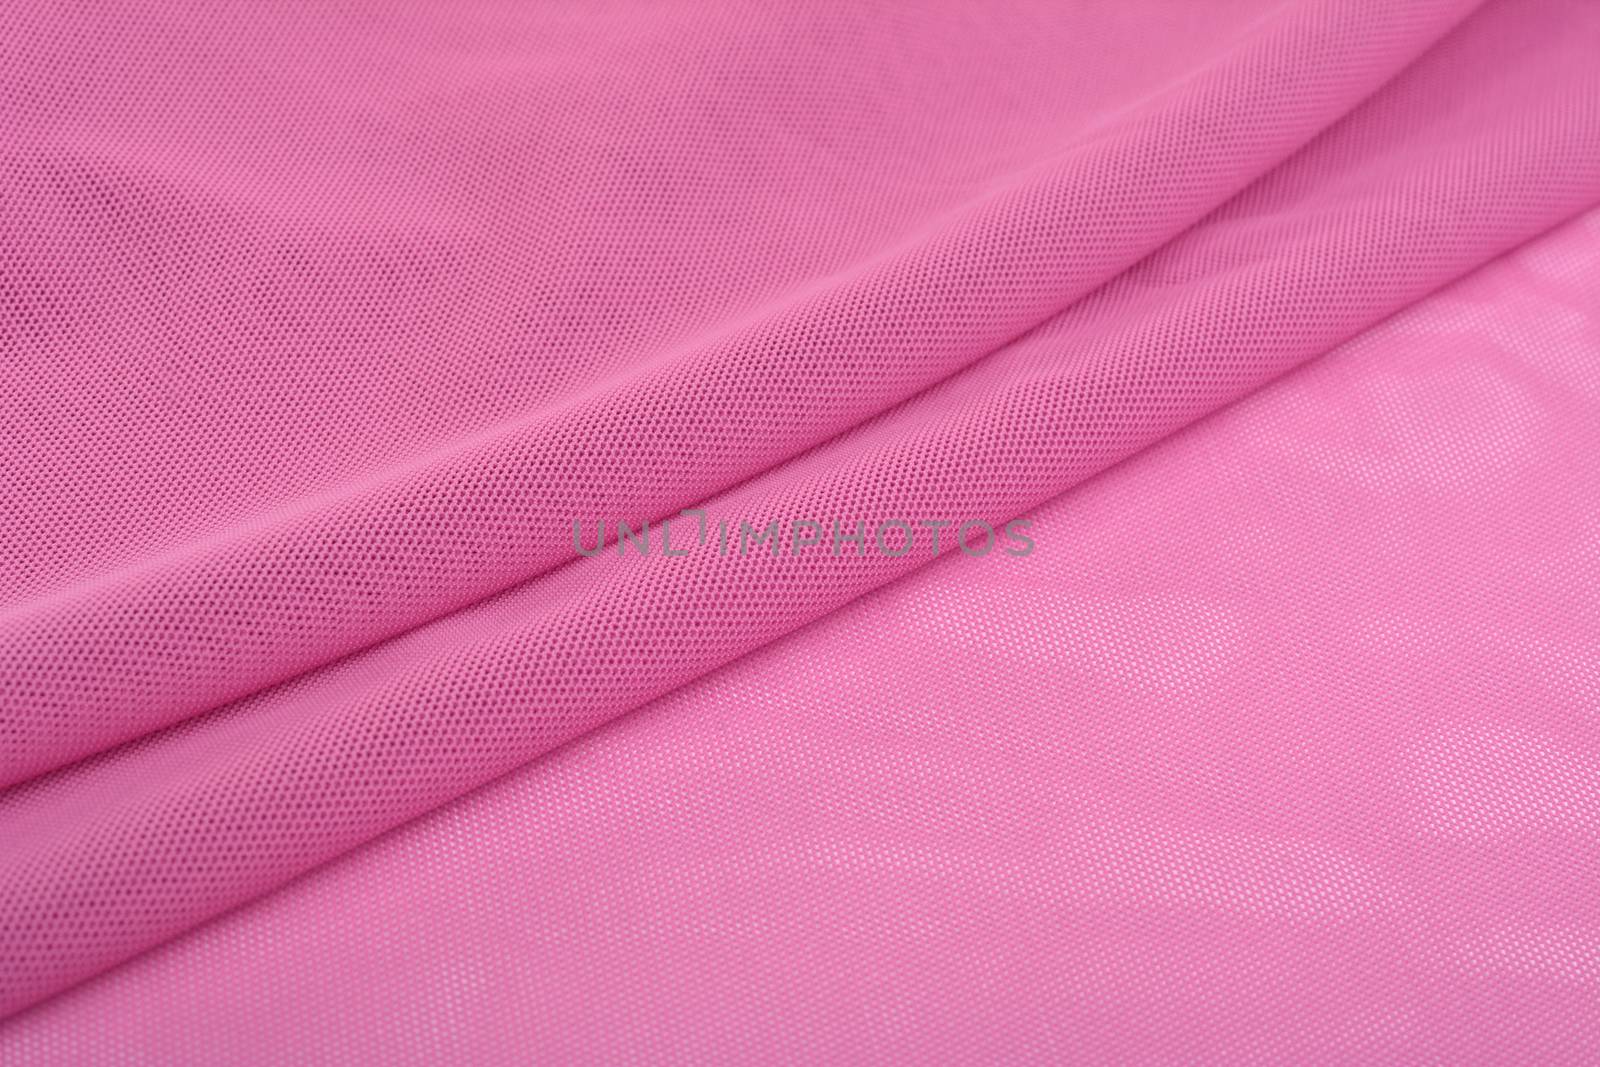 pink Knitted elastic fabric, weaving of threads texture, crumpled fold. For underwear, sports clothes and swimwear. Space for text.